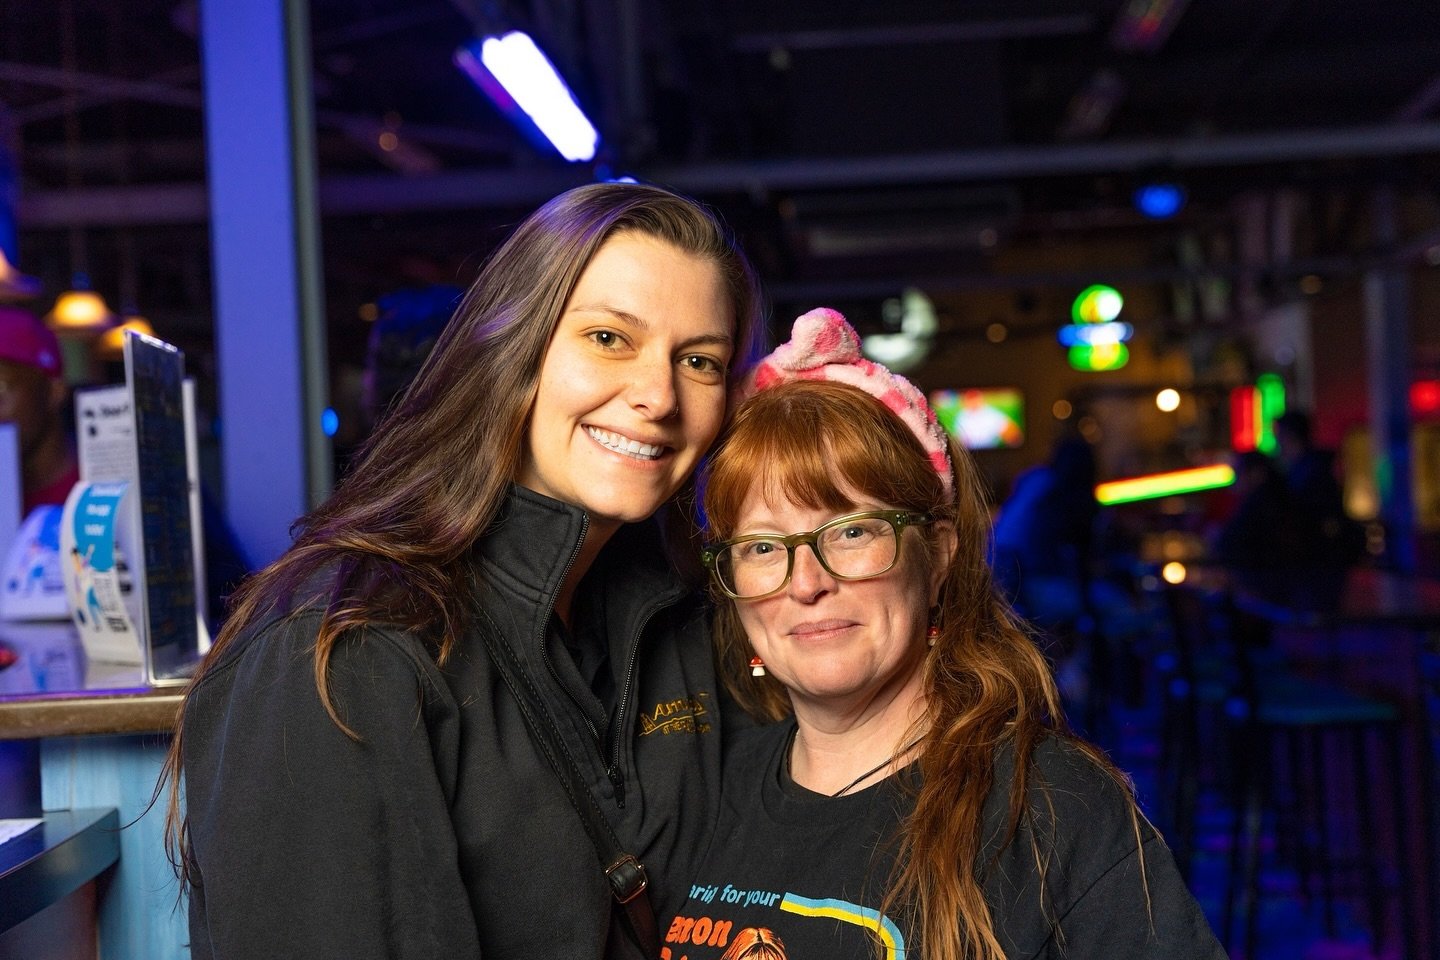 Happy #Mothers Day from everyone here at Arnold&rsquo;s! Pictured here are two awesome hard working mothers from our staff! Morgan, our Caf&eacute; Manager, and Katie from Bowling! A huge thank you to all of the wonderful mothers out there for everyt